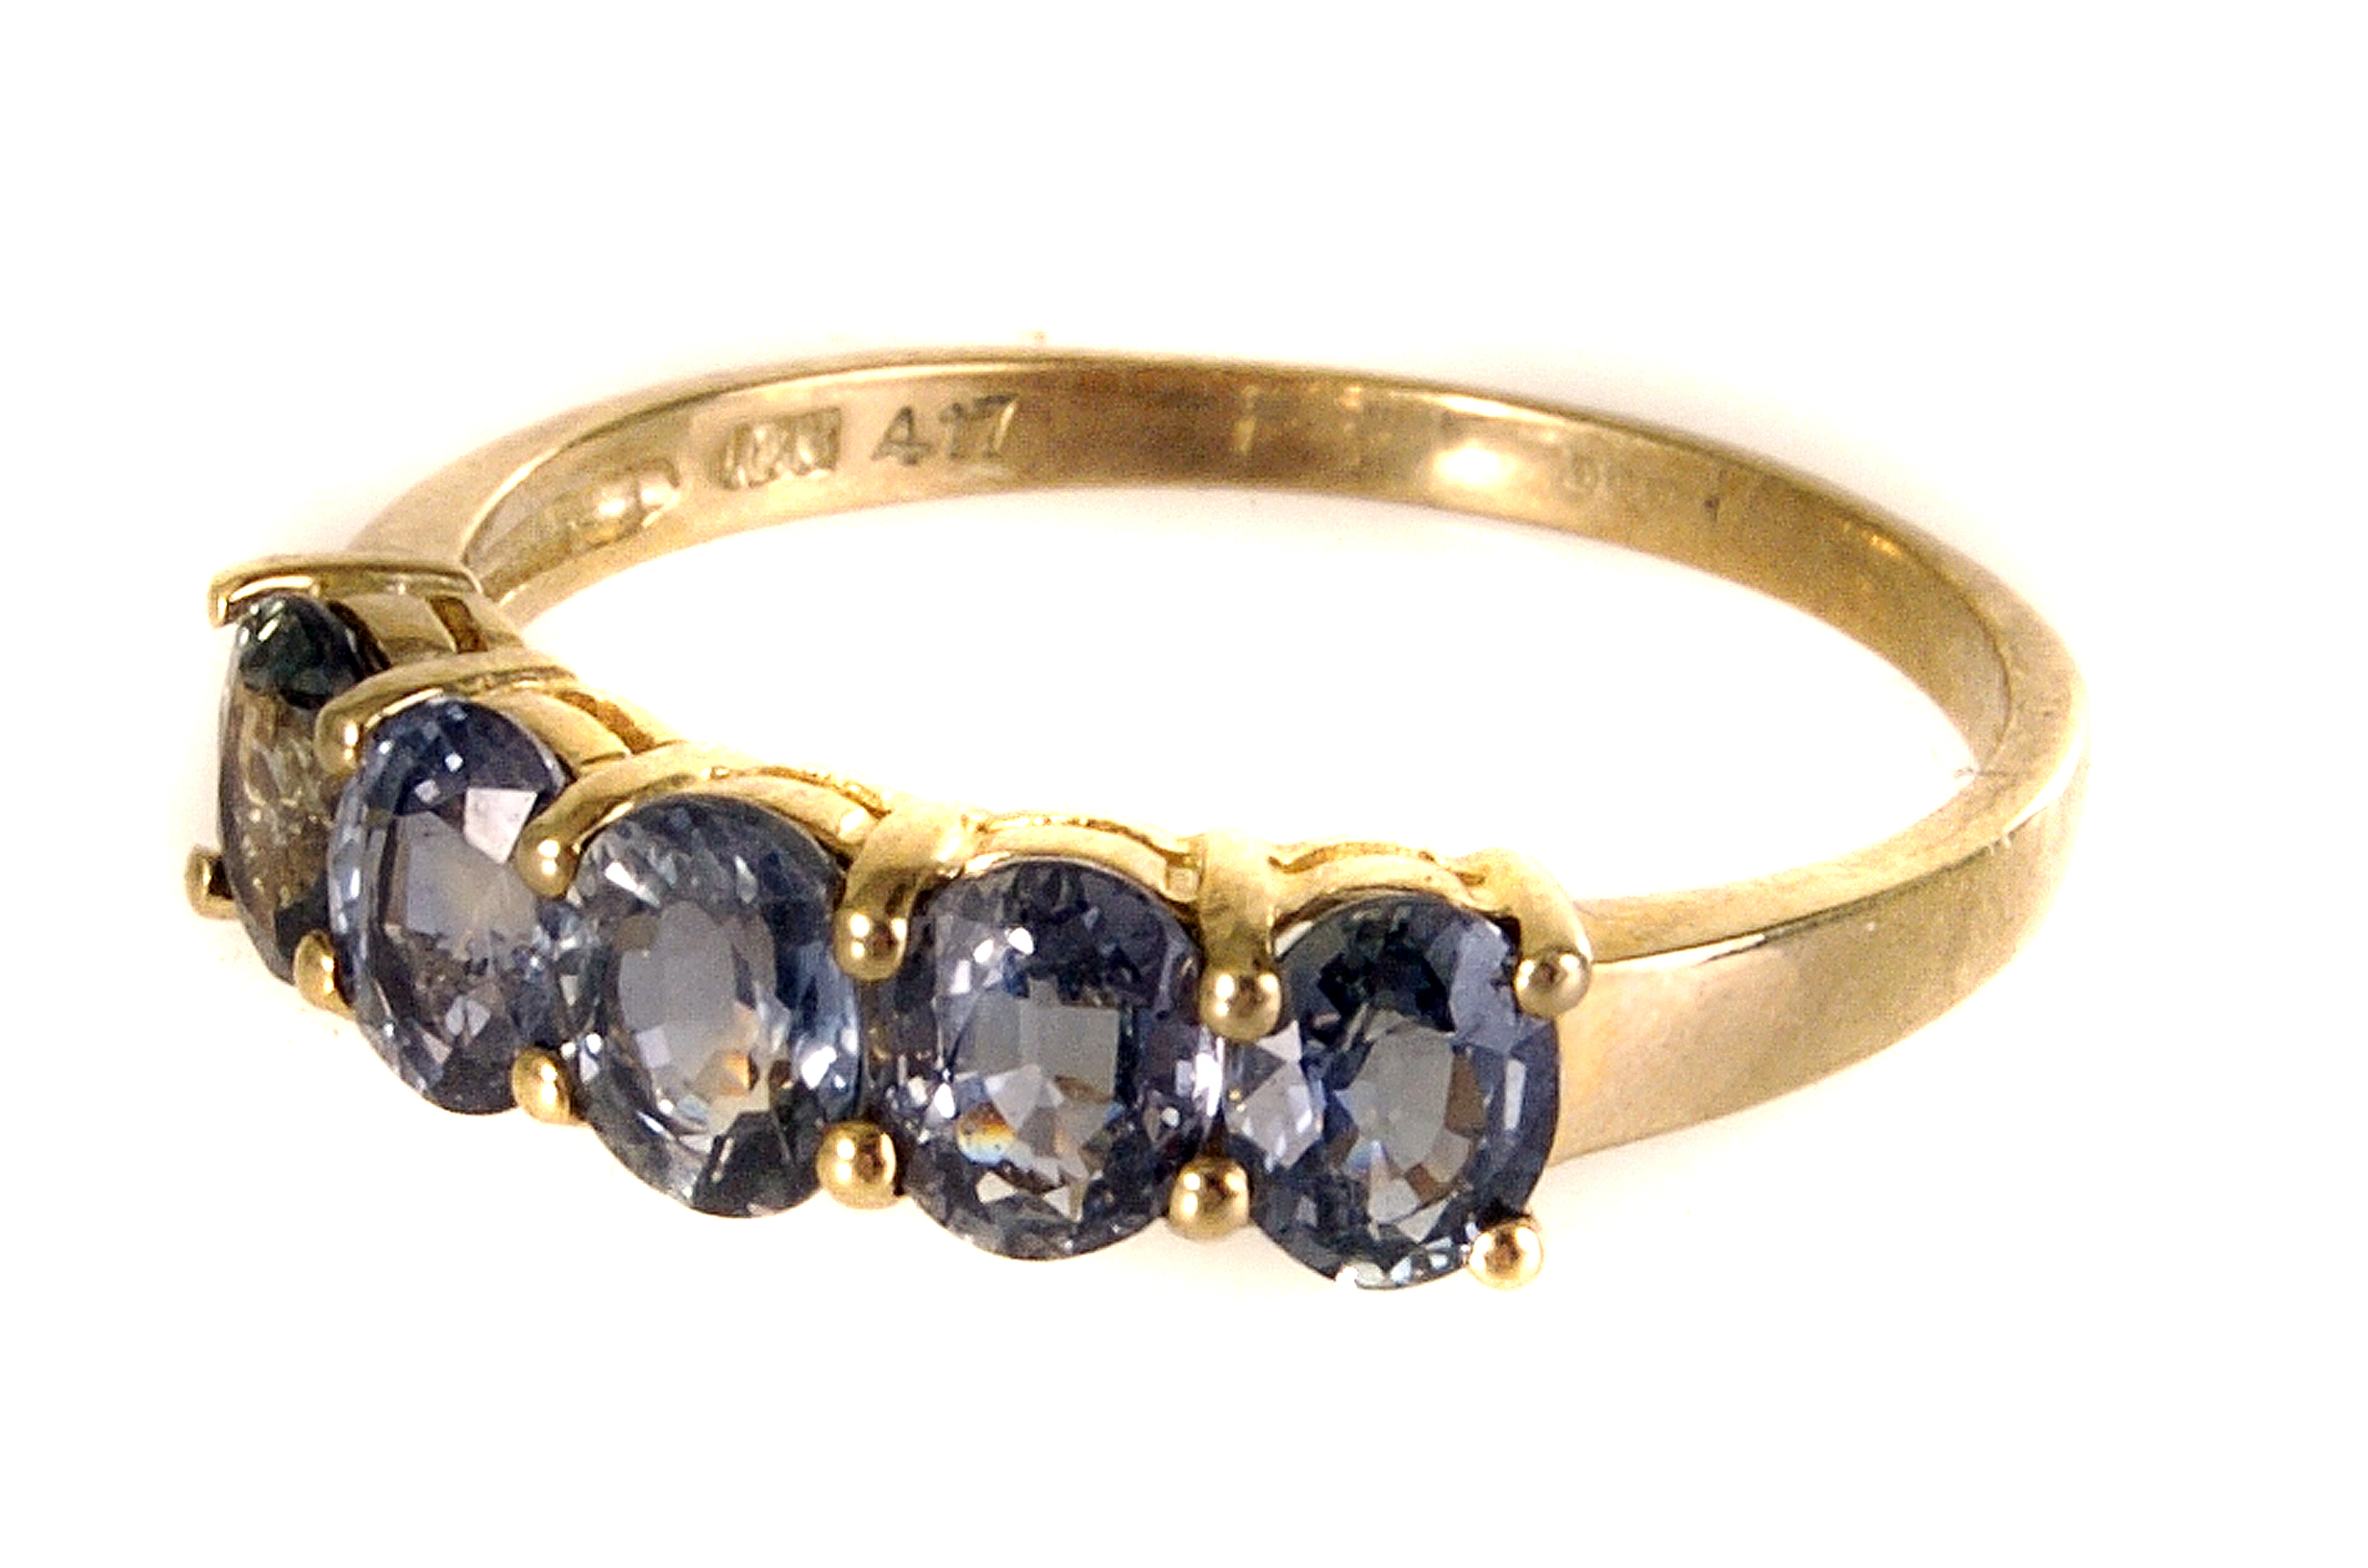 A 9ct gold five stone dress ring, the five oval cut stones of either tourmaline or bi-colour